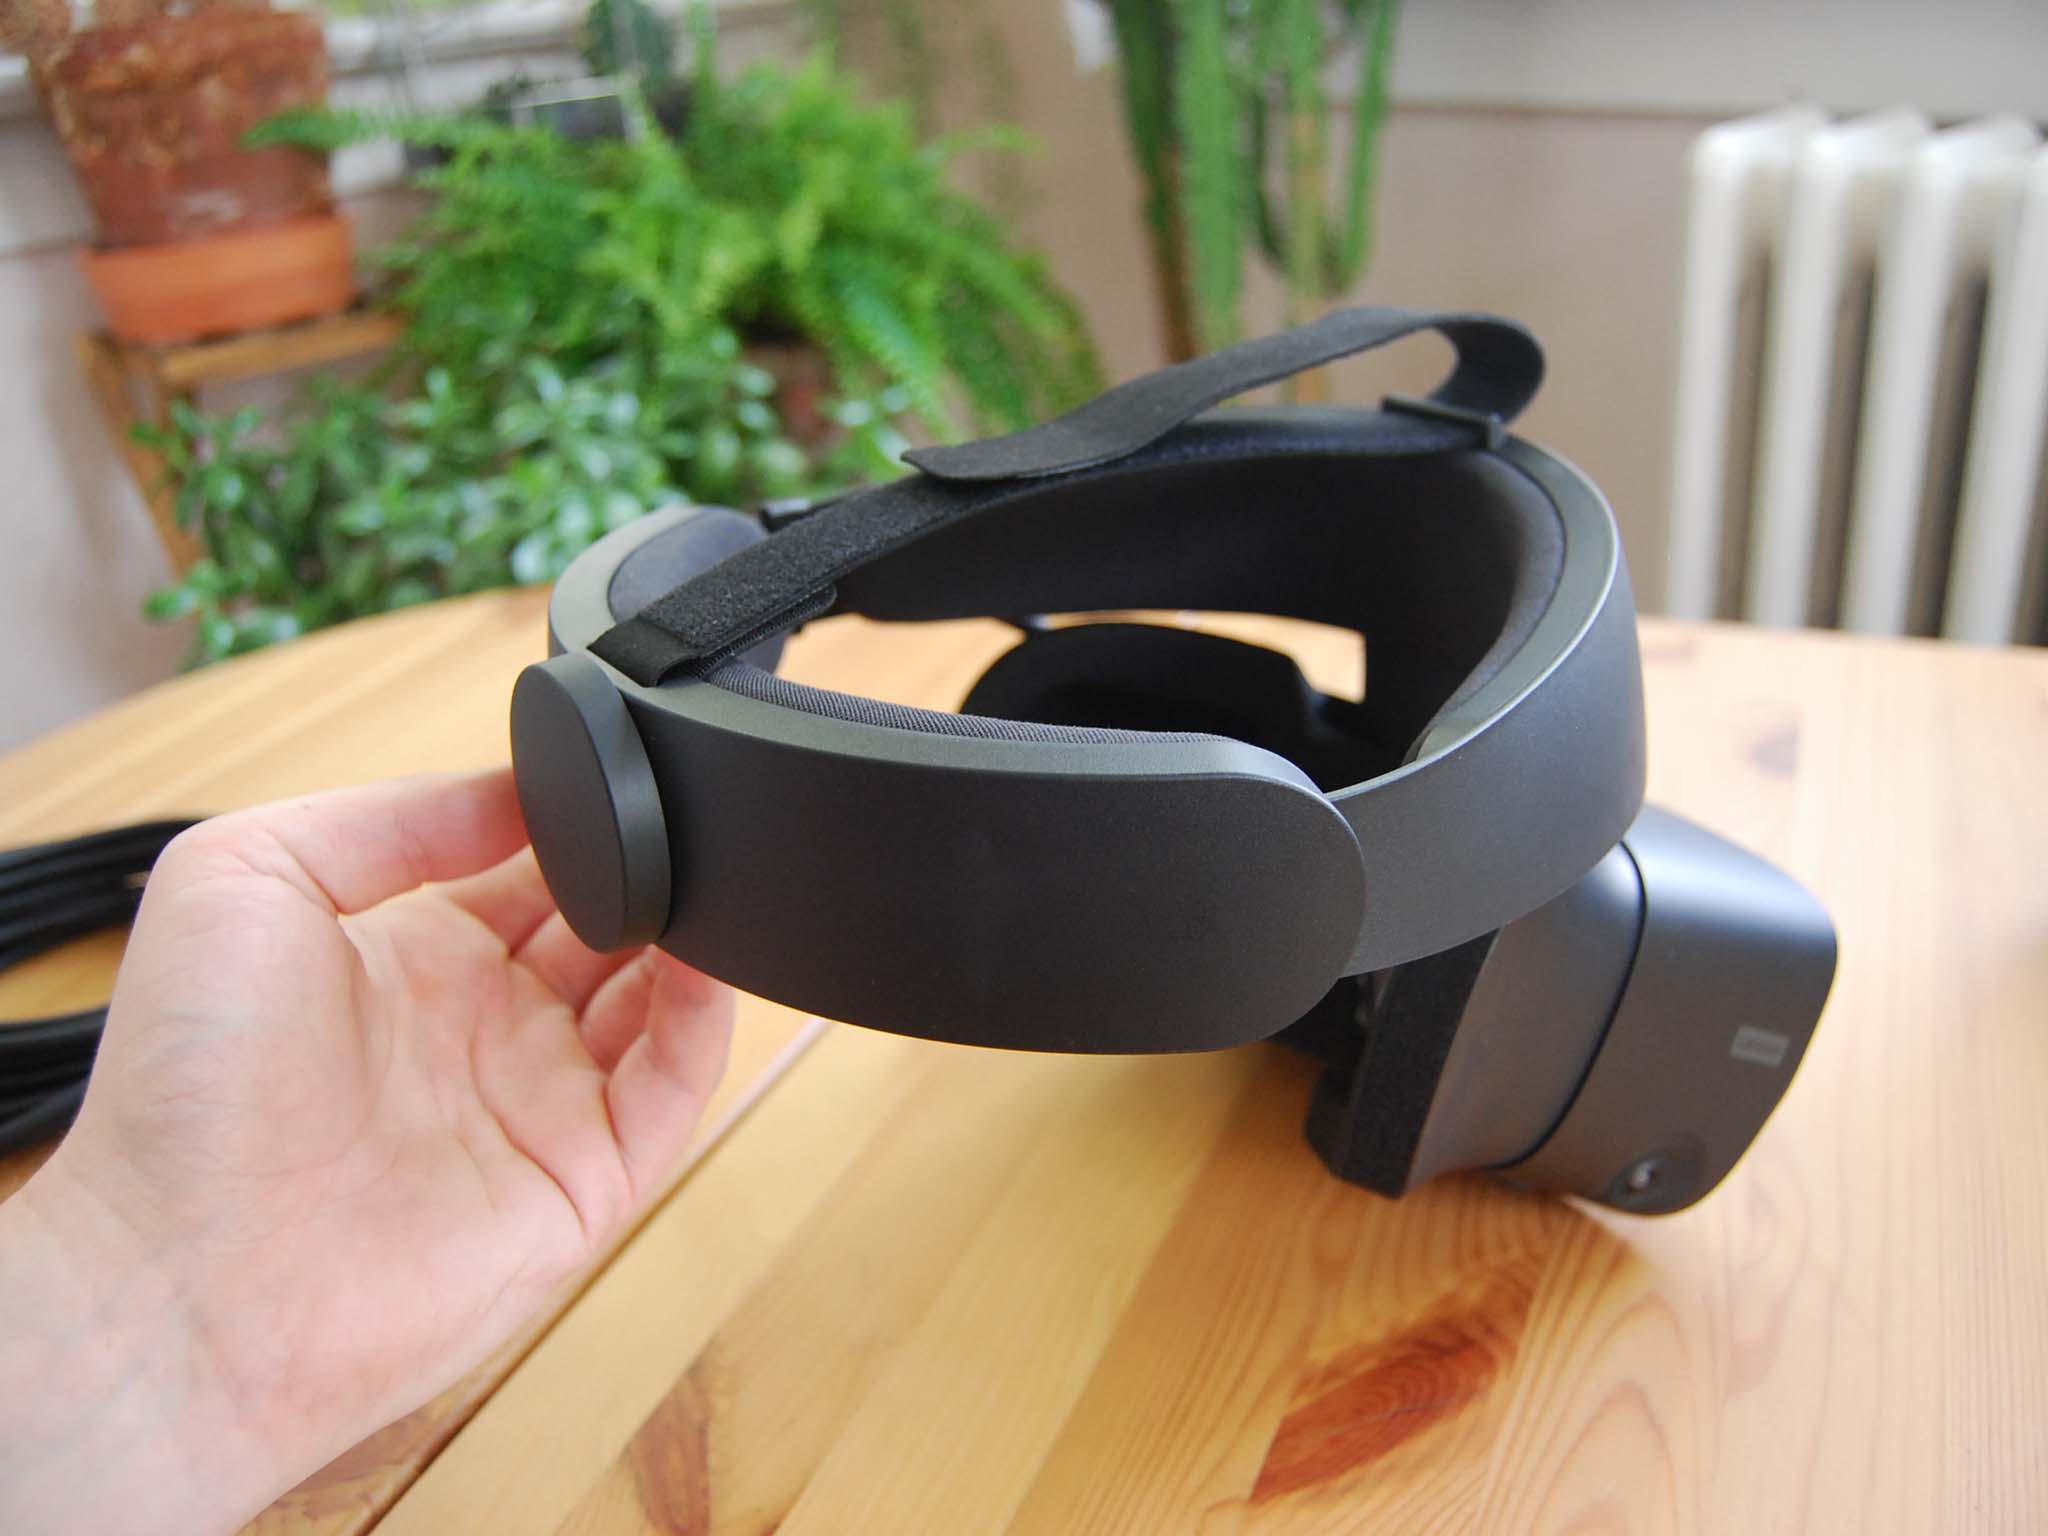 Samsung HMD Odyssey+ vs. Oculus Rift S: Which headset should you buy